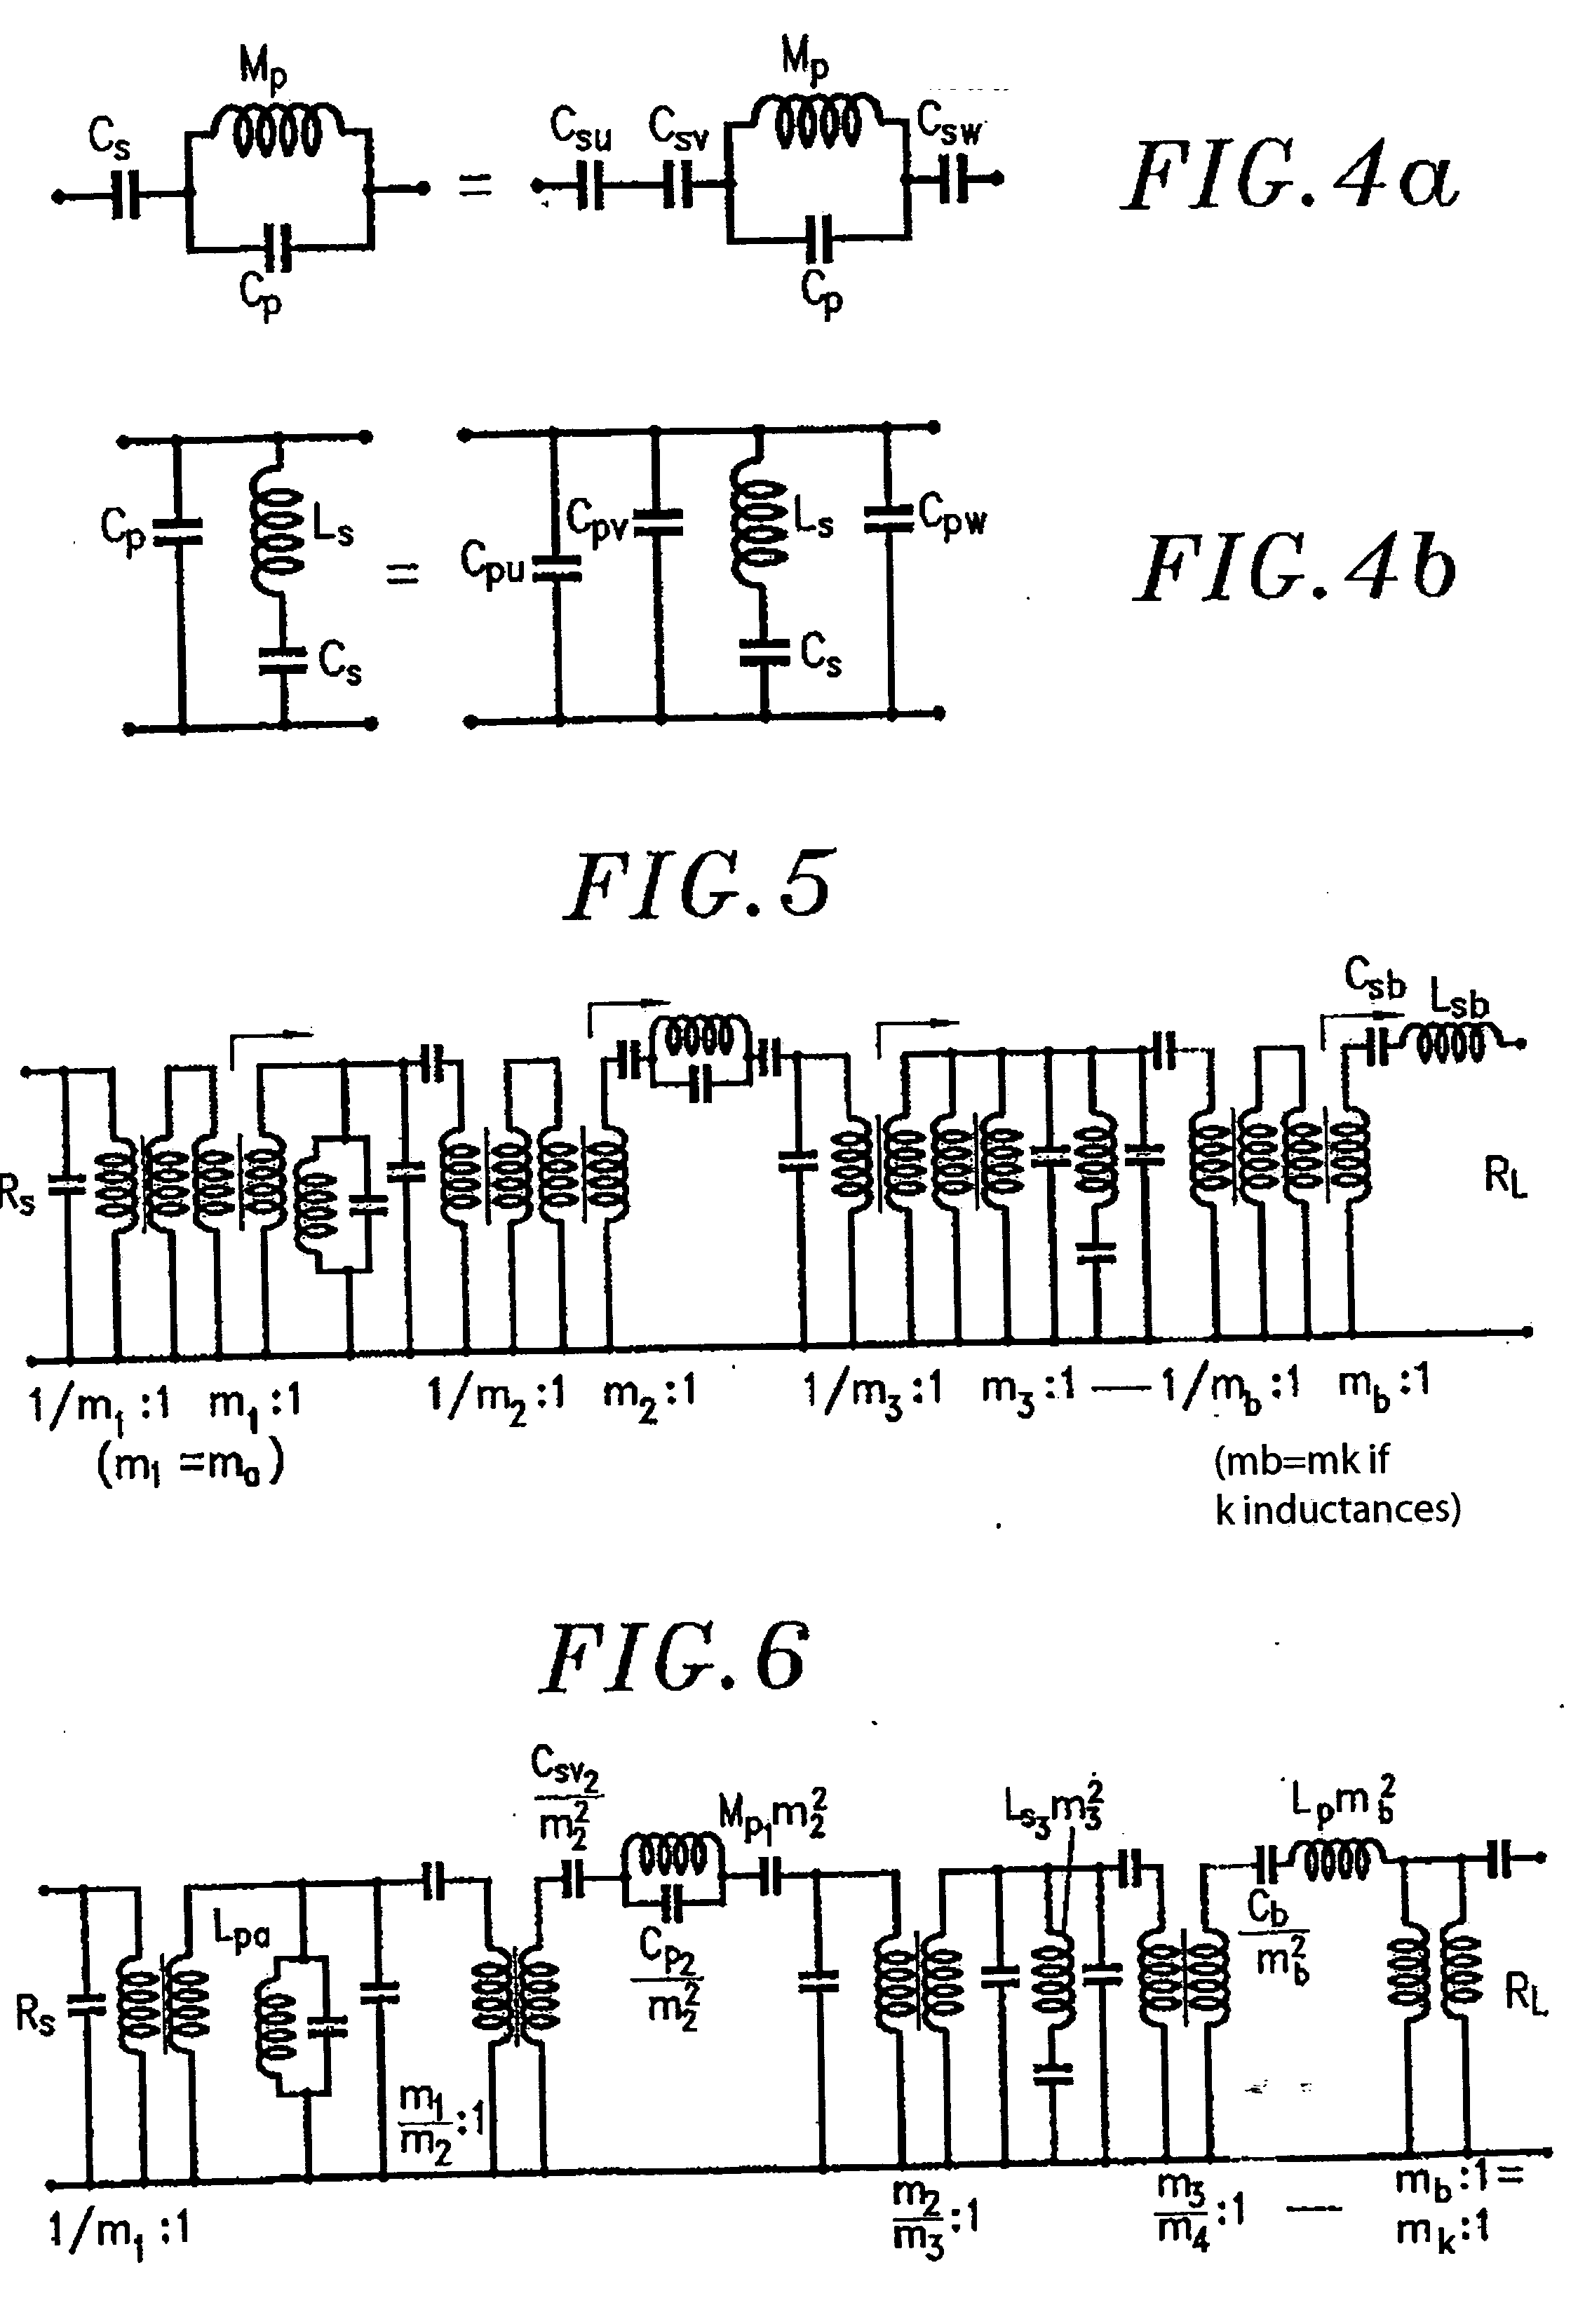 Method for transforming bandpass filters to facilitate their production and resulting devices